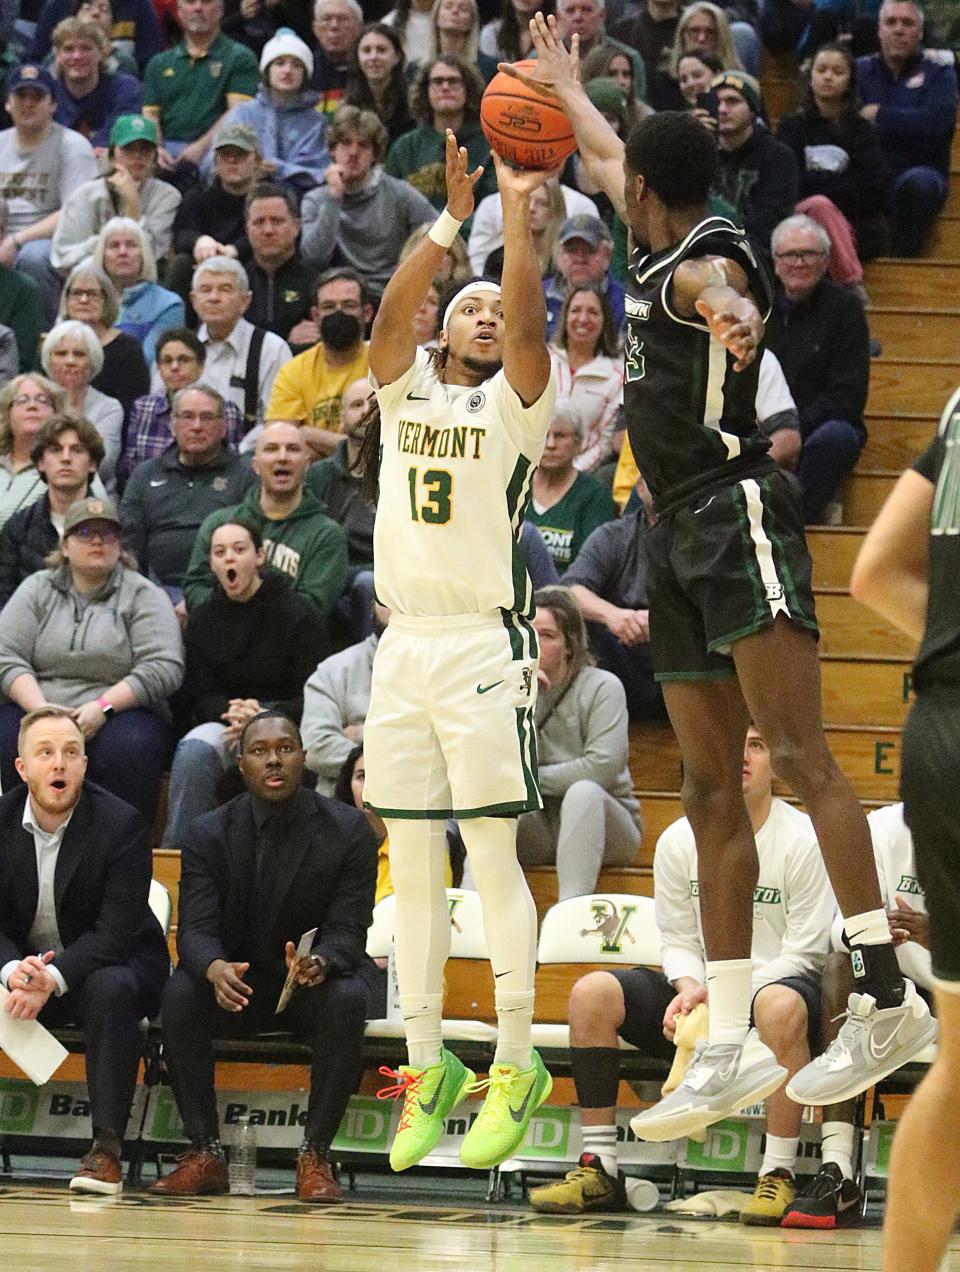 Vermont's Dylan Penn drains a 3-point shot over the outstretched arms of of Binghamton's Tavelon White during the Catamounts 79-57 win over the Bearcats in the America East semifinals on Tuesday night at Patrick Gym.